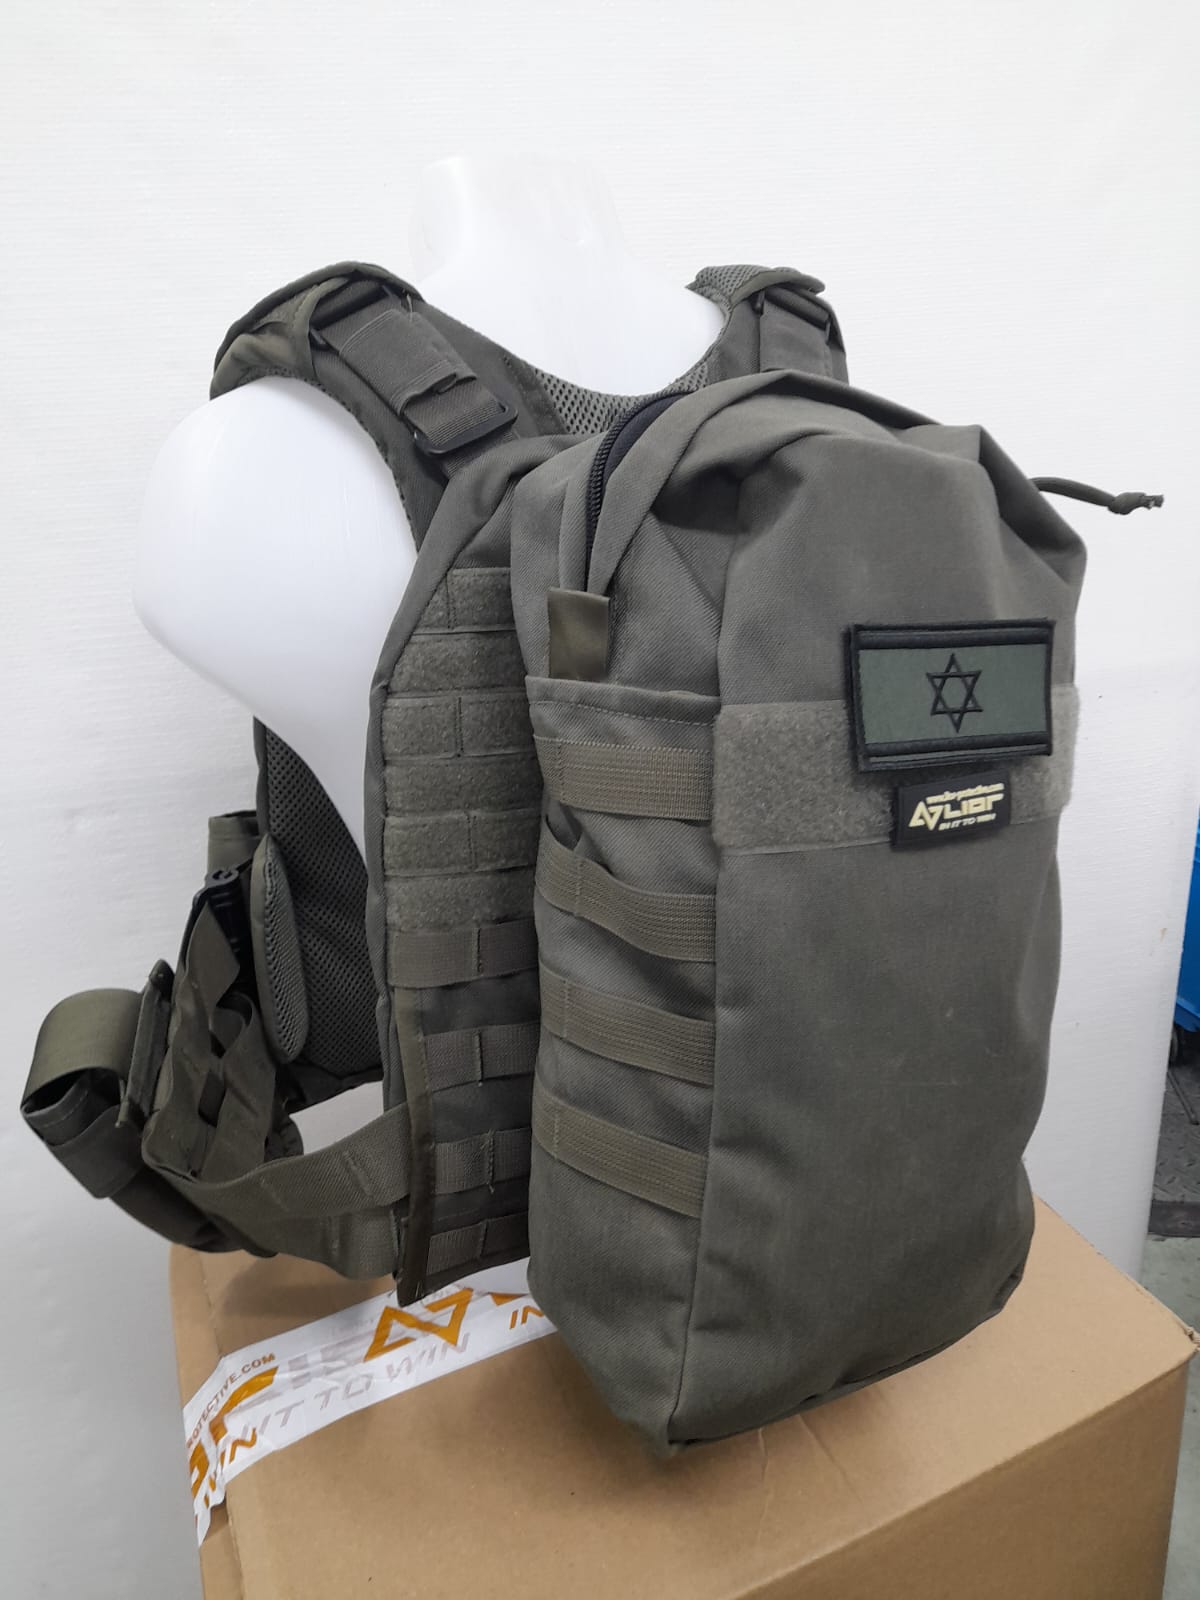 Hydration MOLLE Backpack 11L